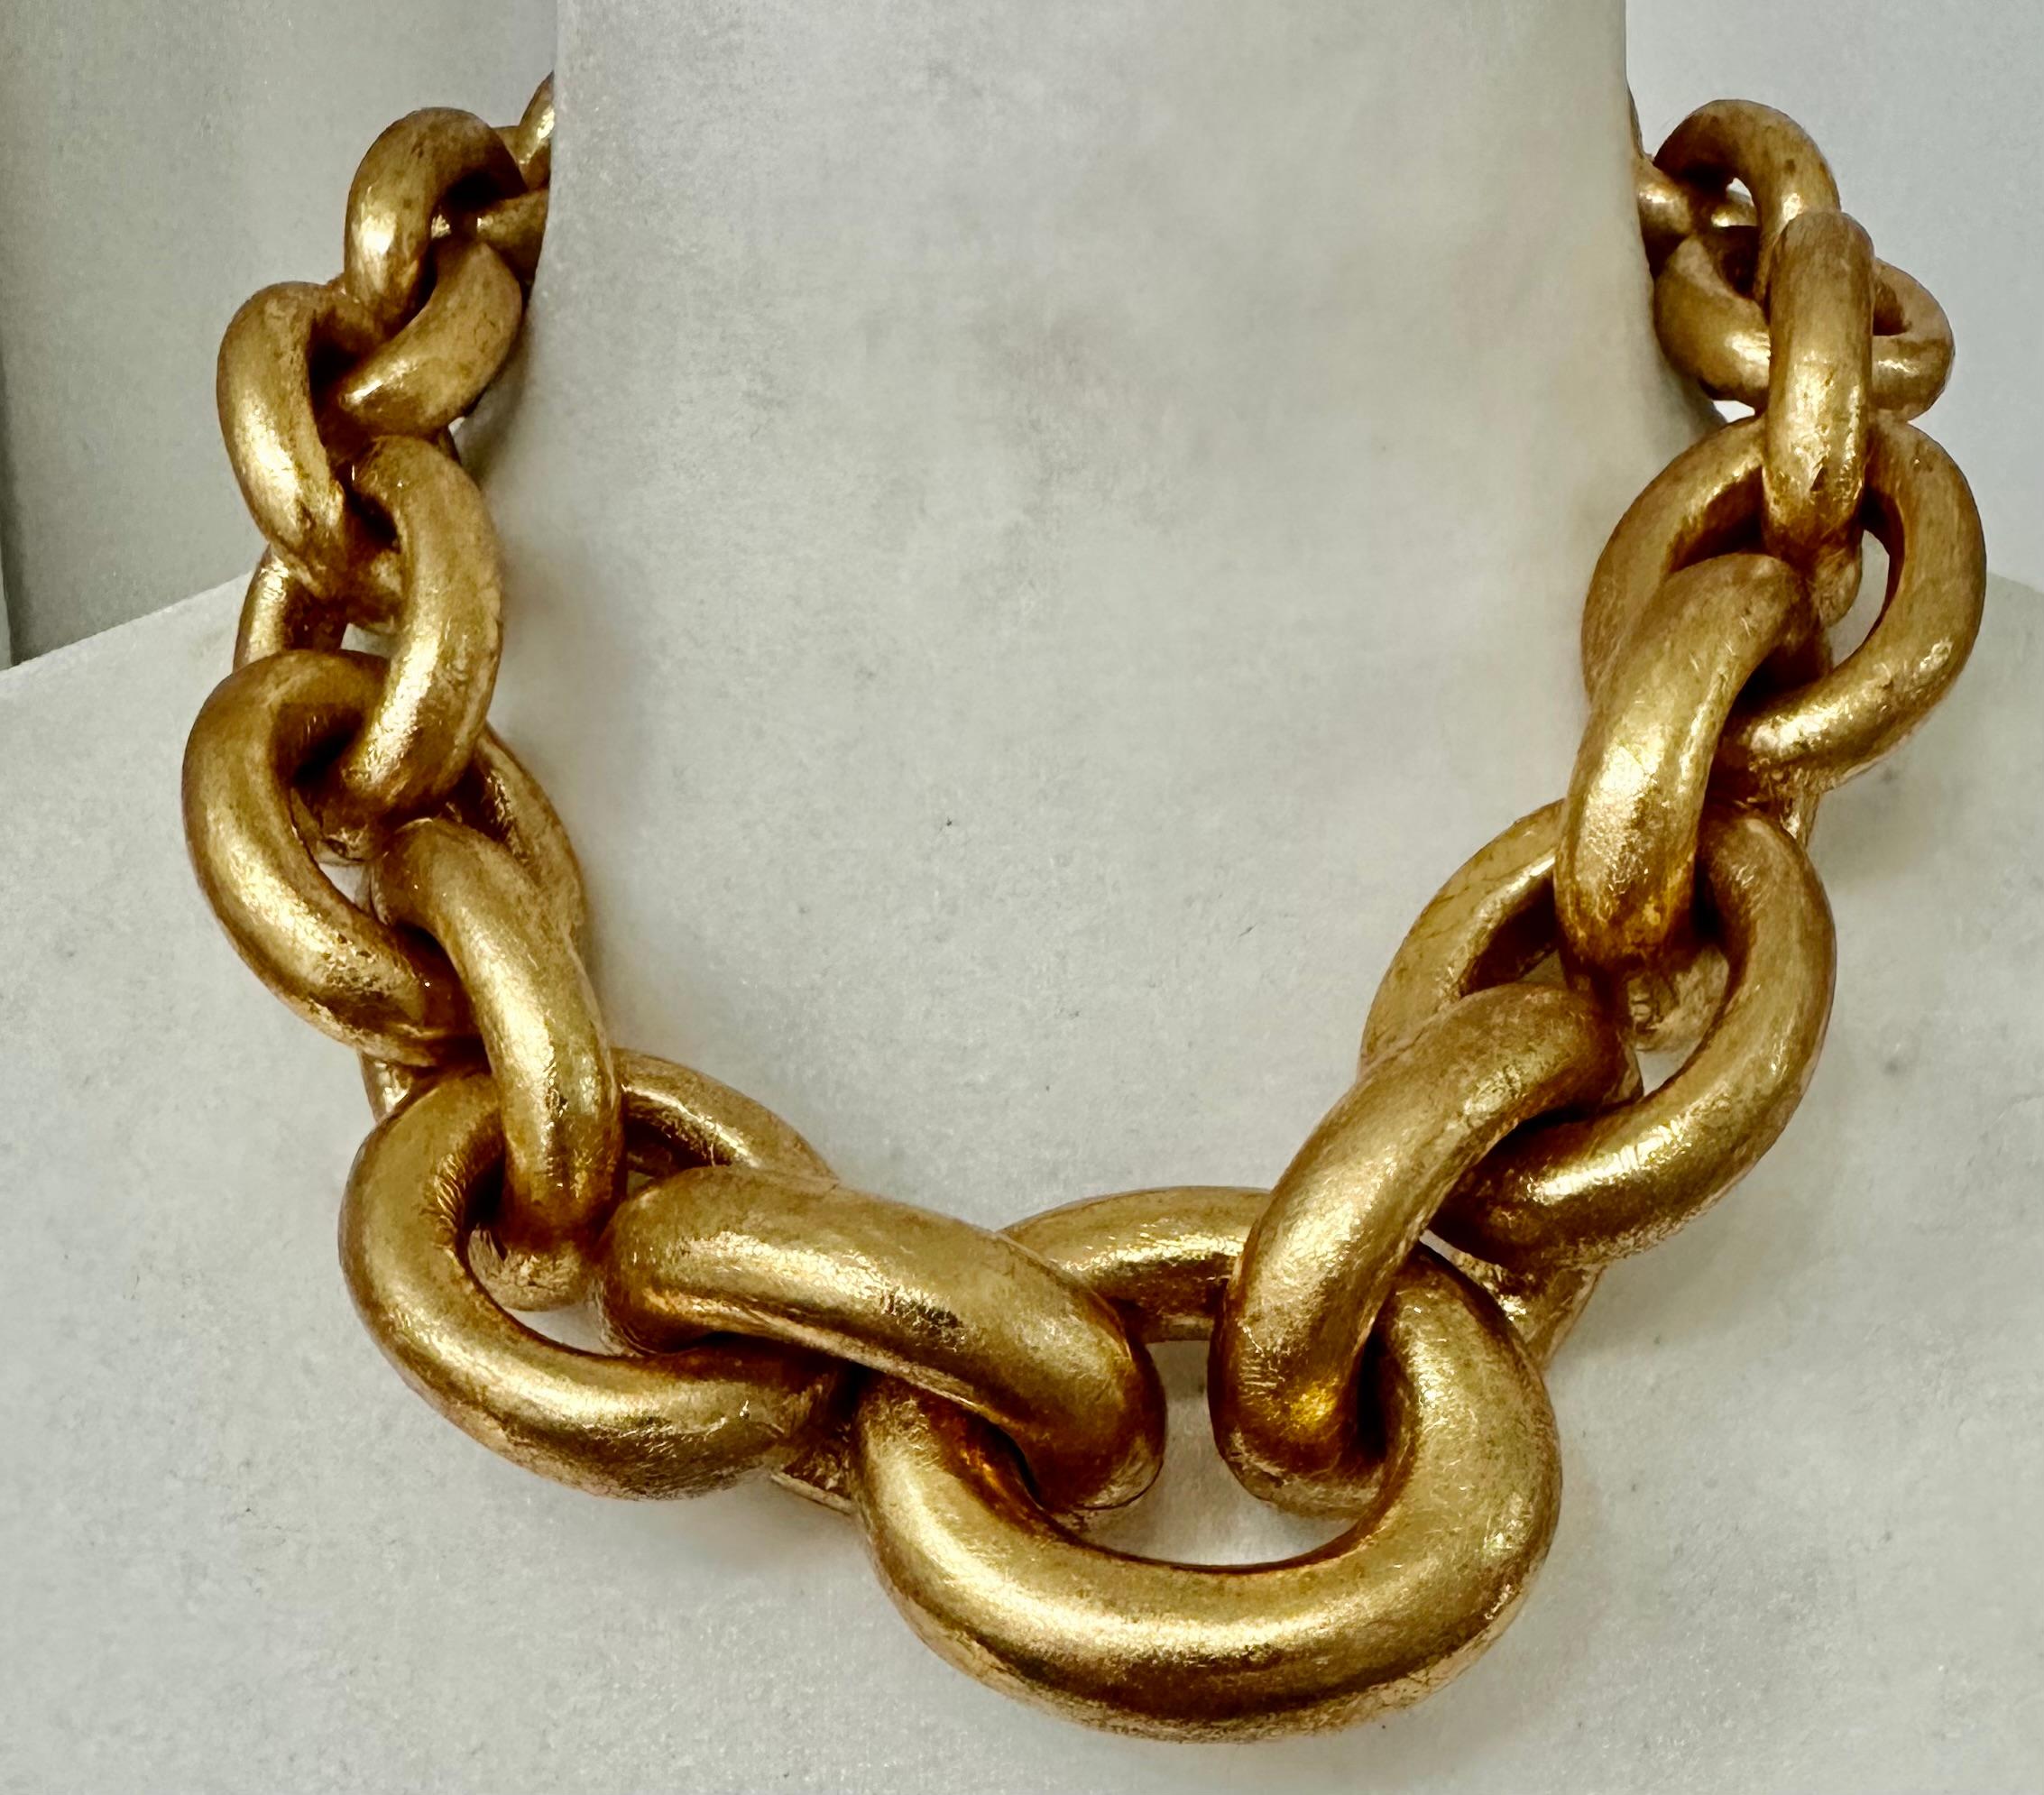 Monies Oversized Oval Link Choker in Gold and wood In New Condition For Sale In Virginia Beach, VA